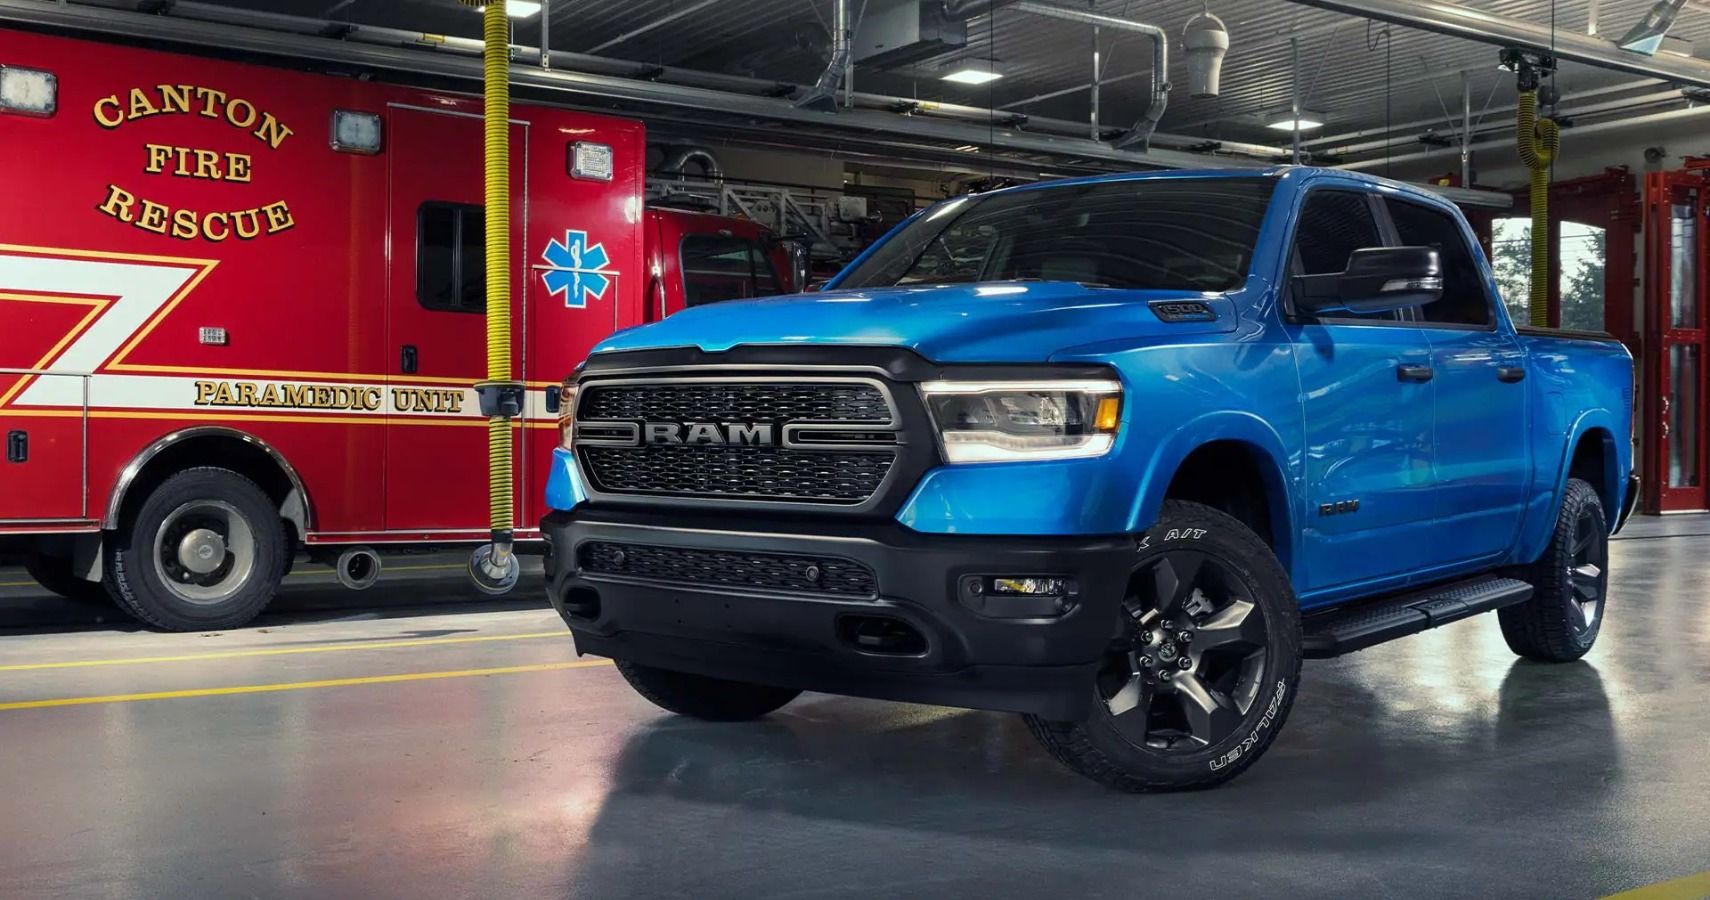 The 2022 Ram 1500 Built To Serve Firefighter Edition in the firefighter station.